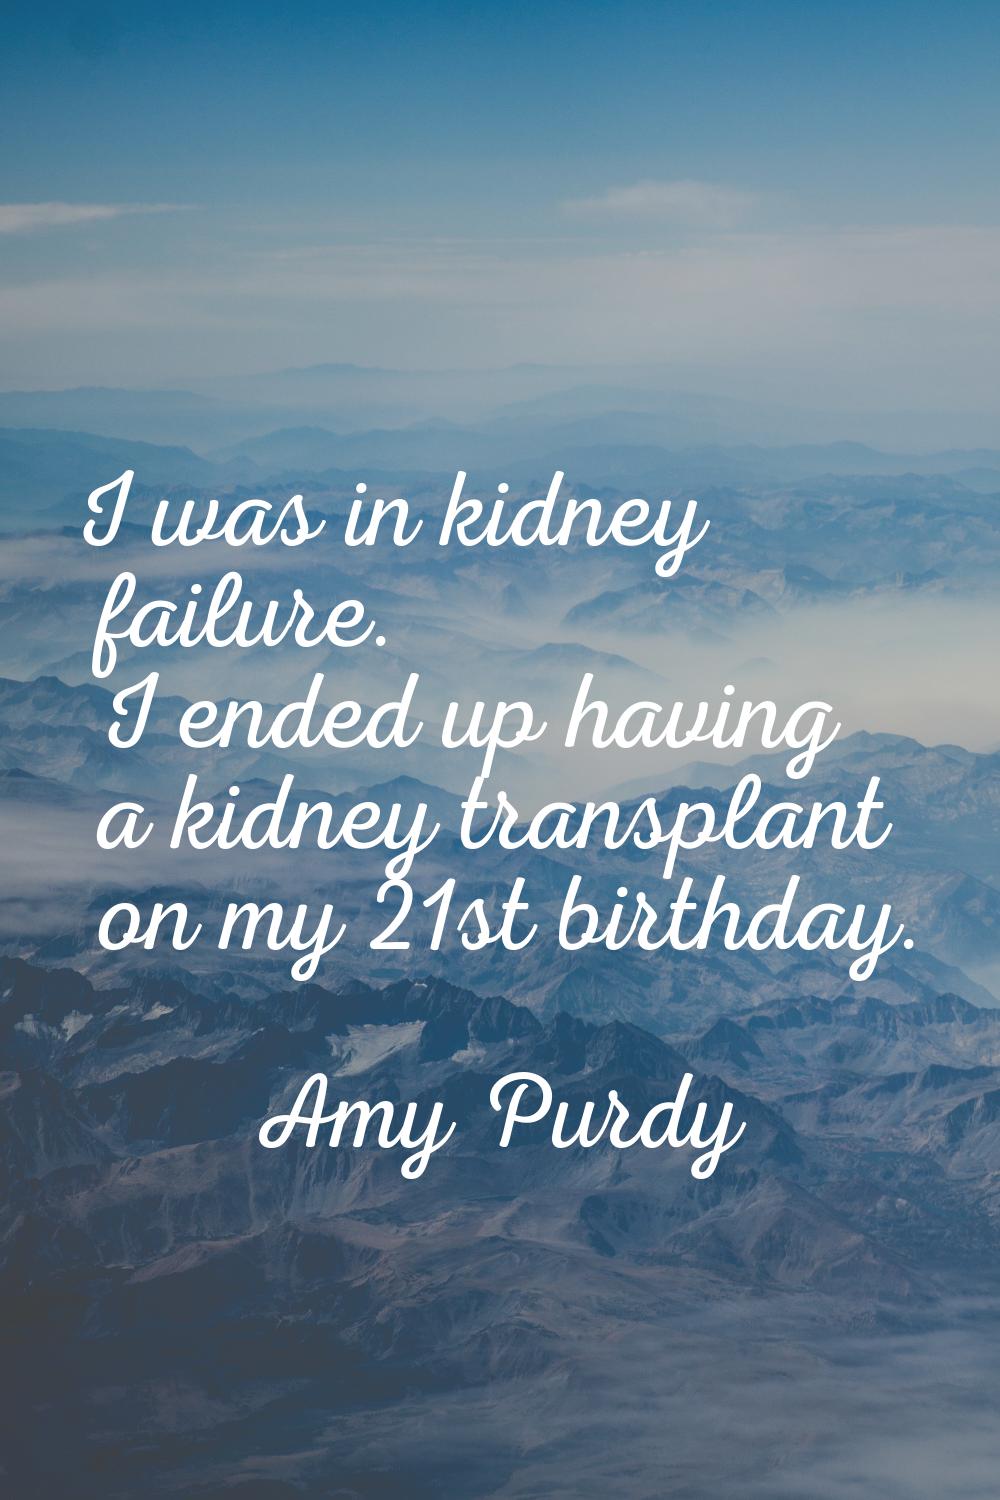 I was in kidney failure. I ended up having a kidney transplant on my 21st birthday.